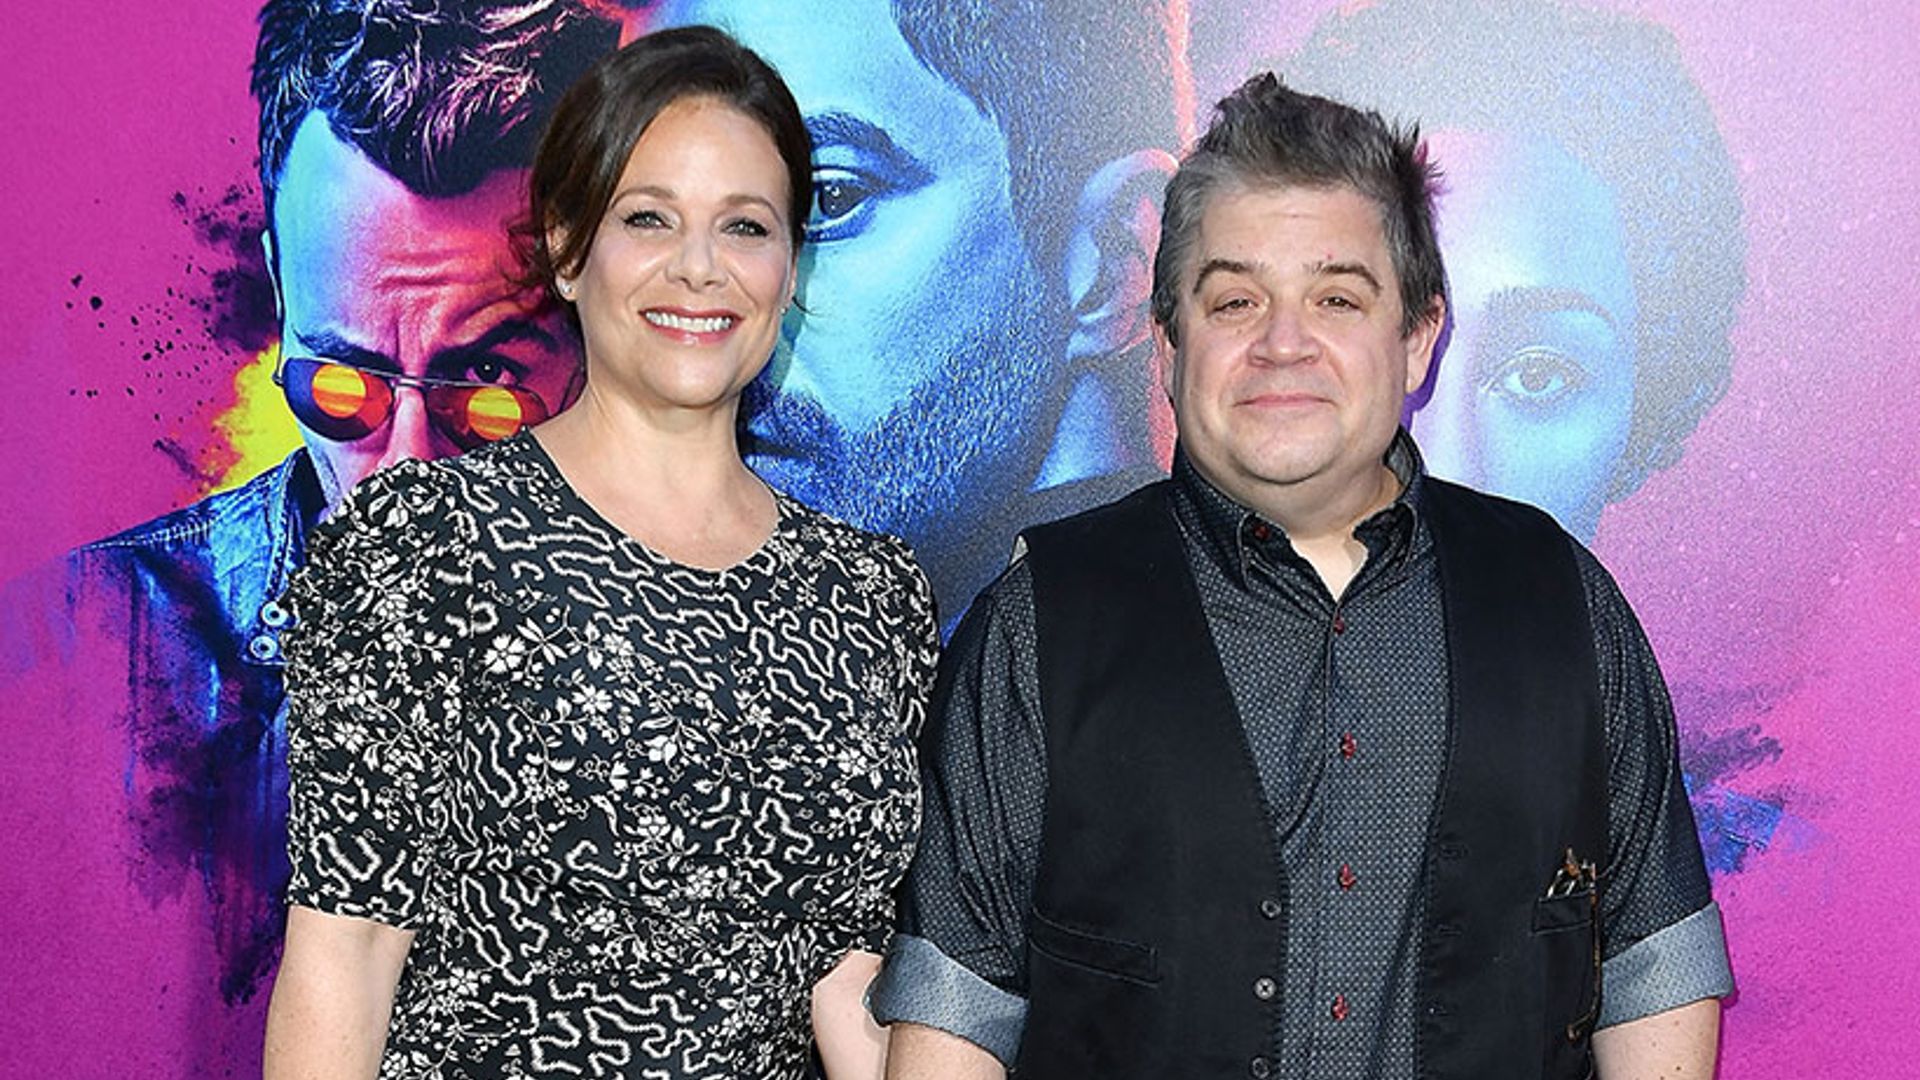 Patton Oswalt announces his engagement following tragic death of his wife